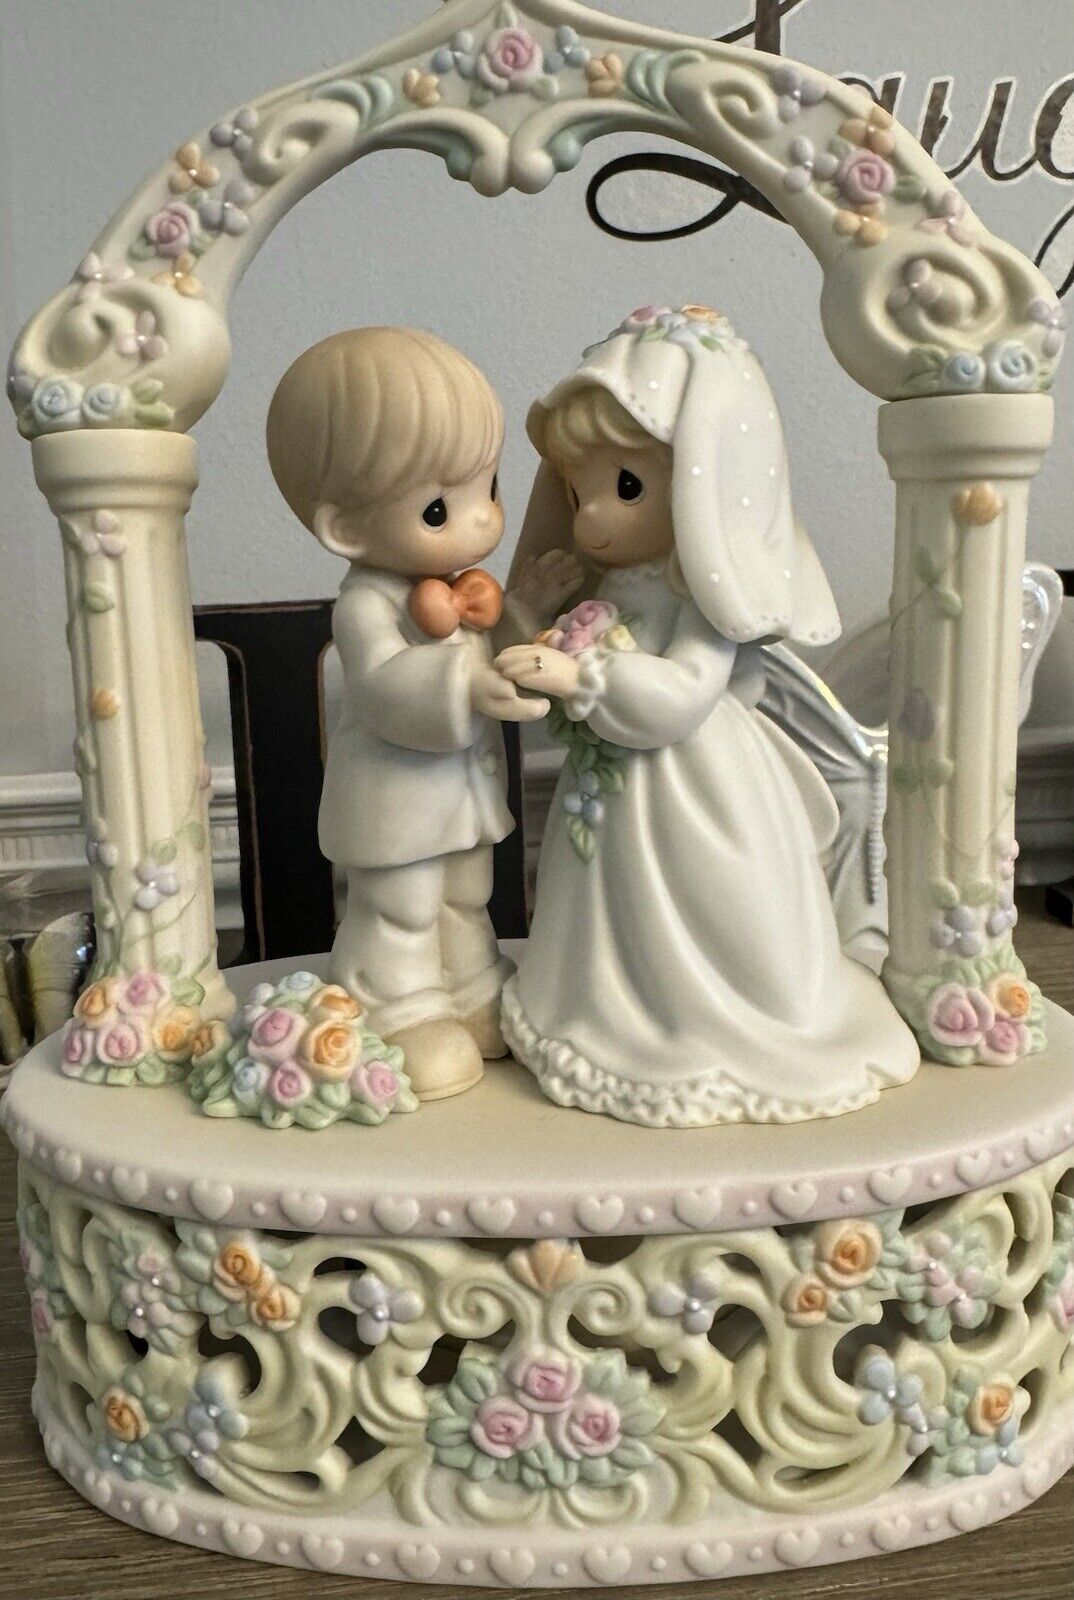 PRECIOUS MOMENTS FIGURINE - I GIVE YOU MY LOVE FOREVER TRUE (WEDDING MUSICAL)